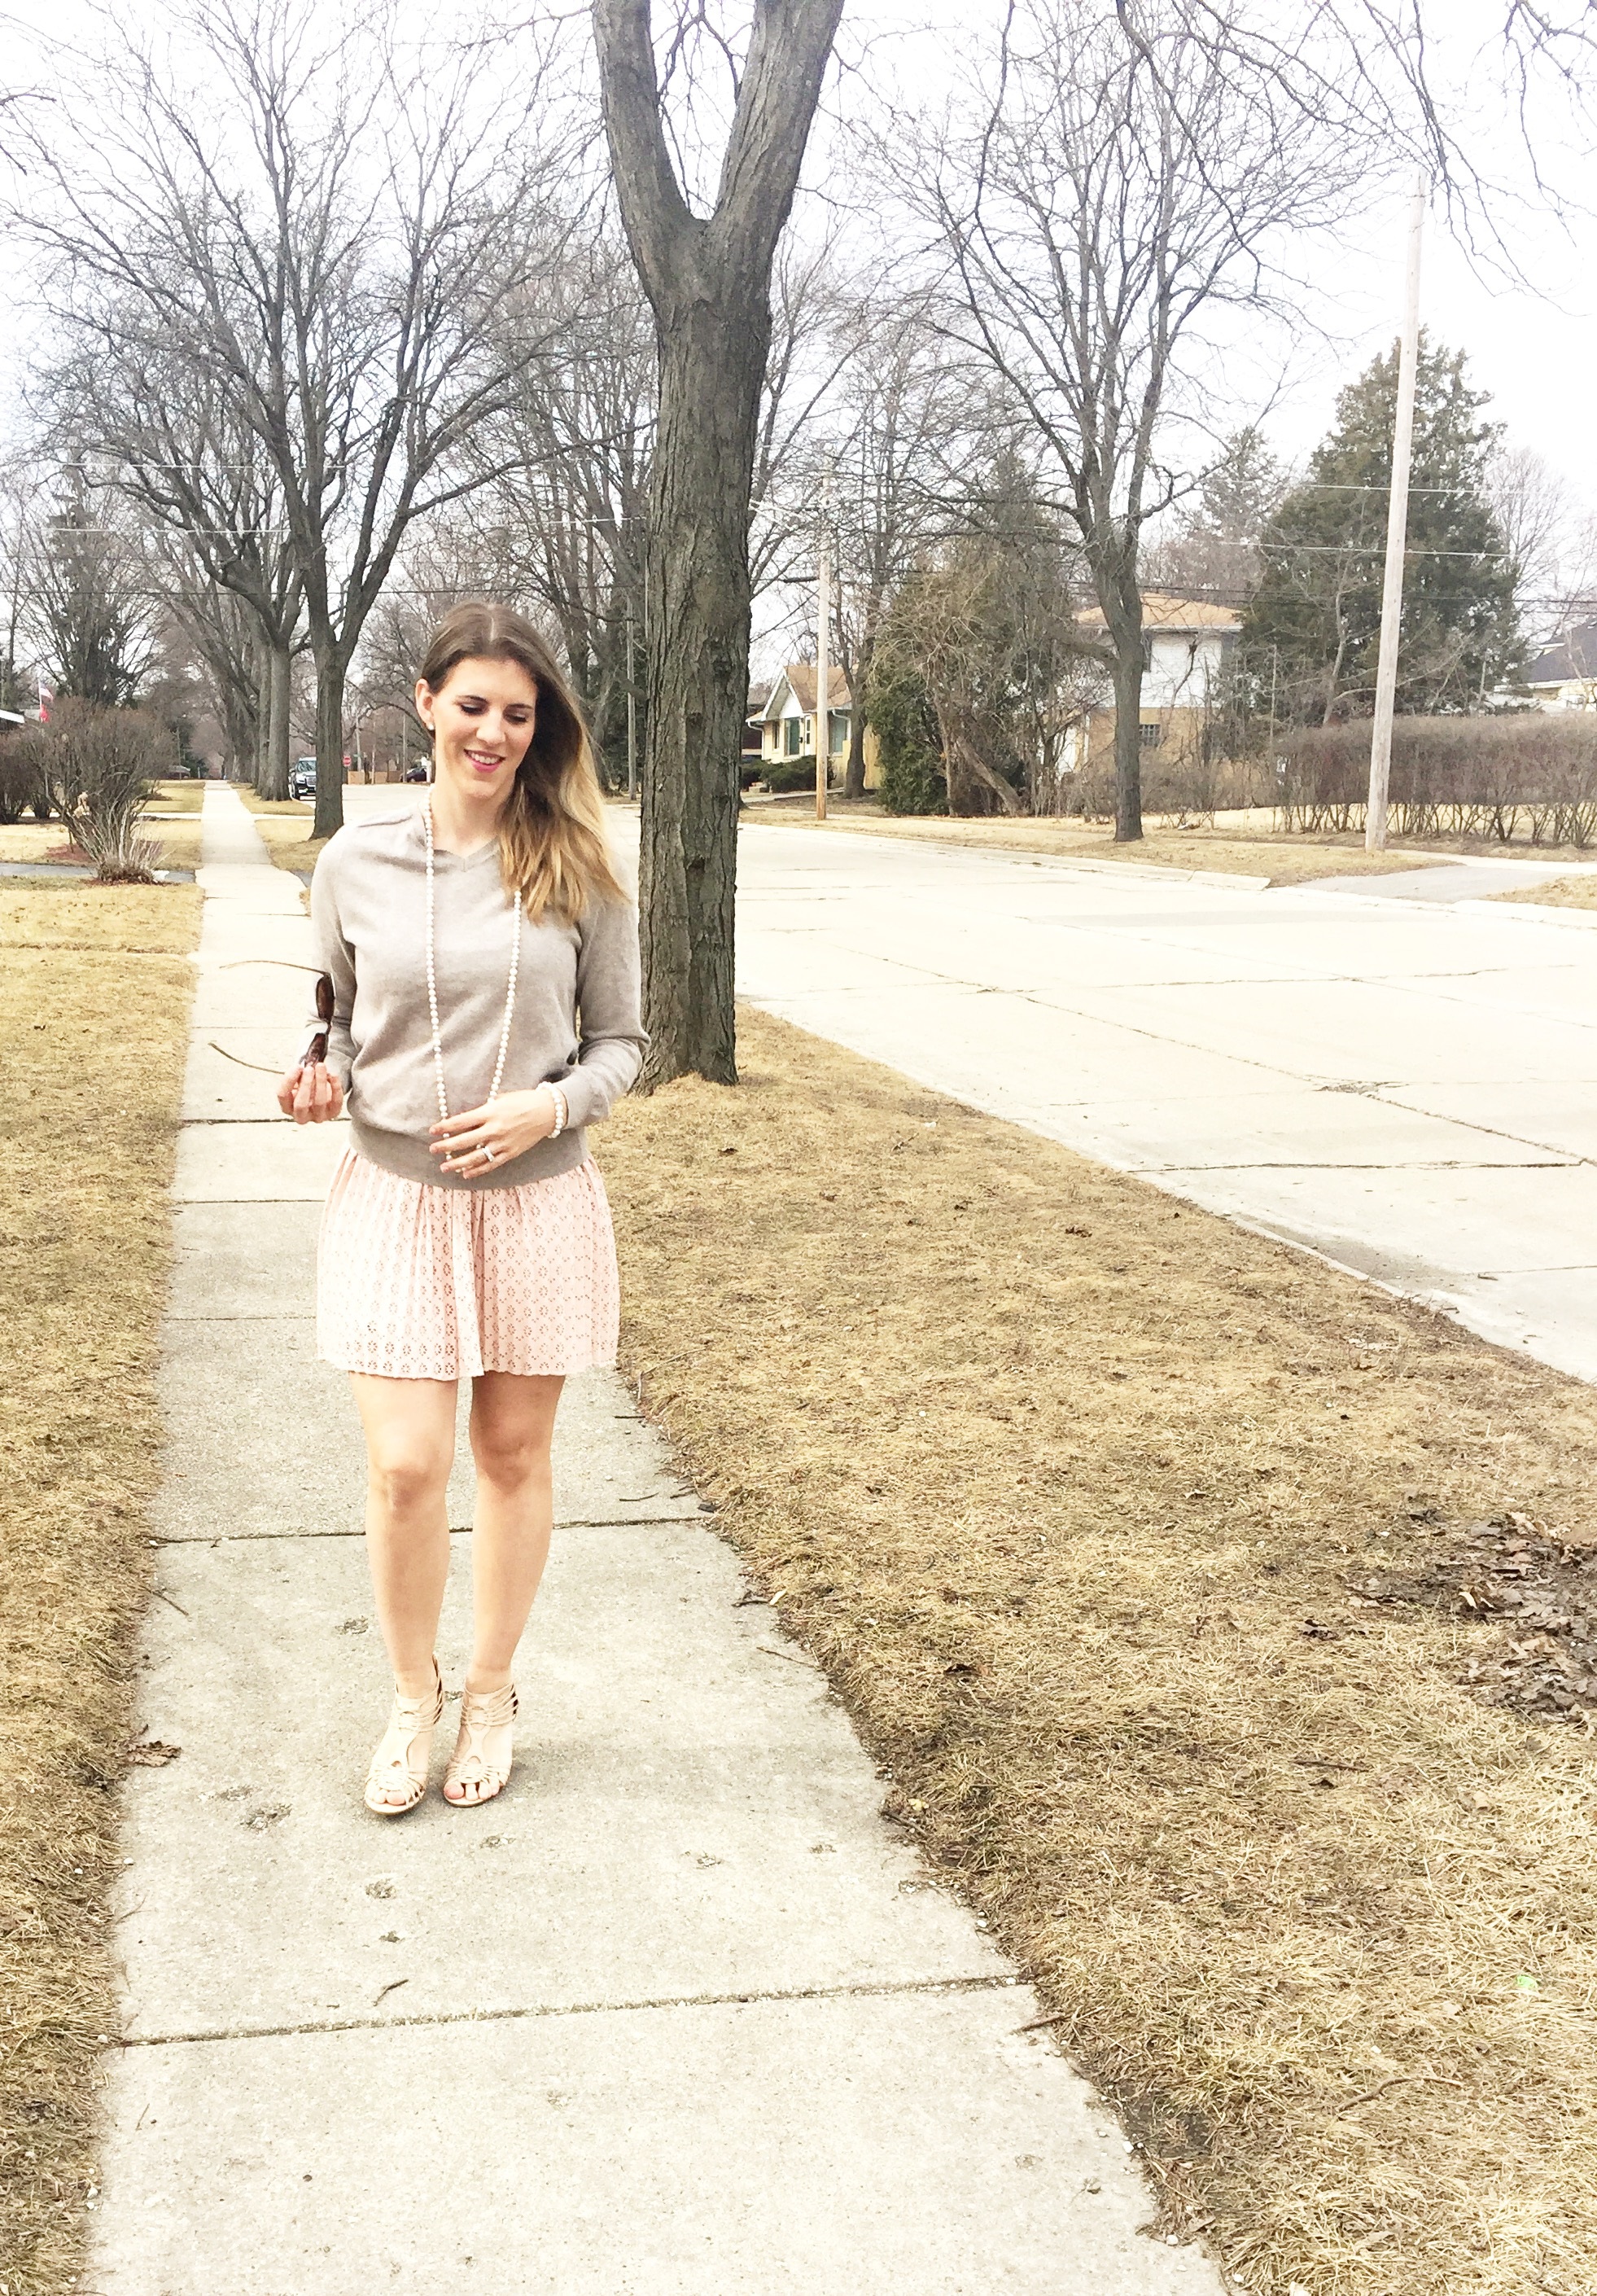 Transitioning fashion from winter to spring